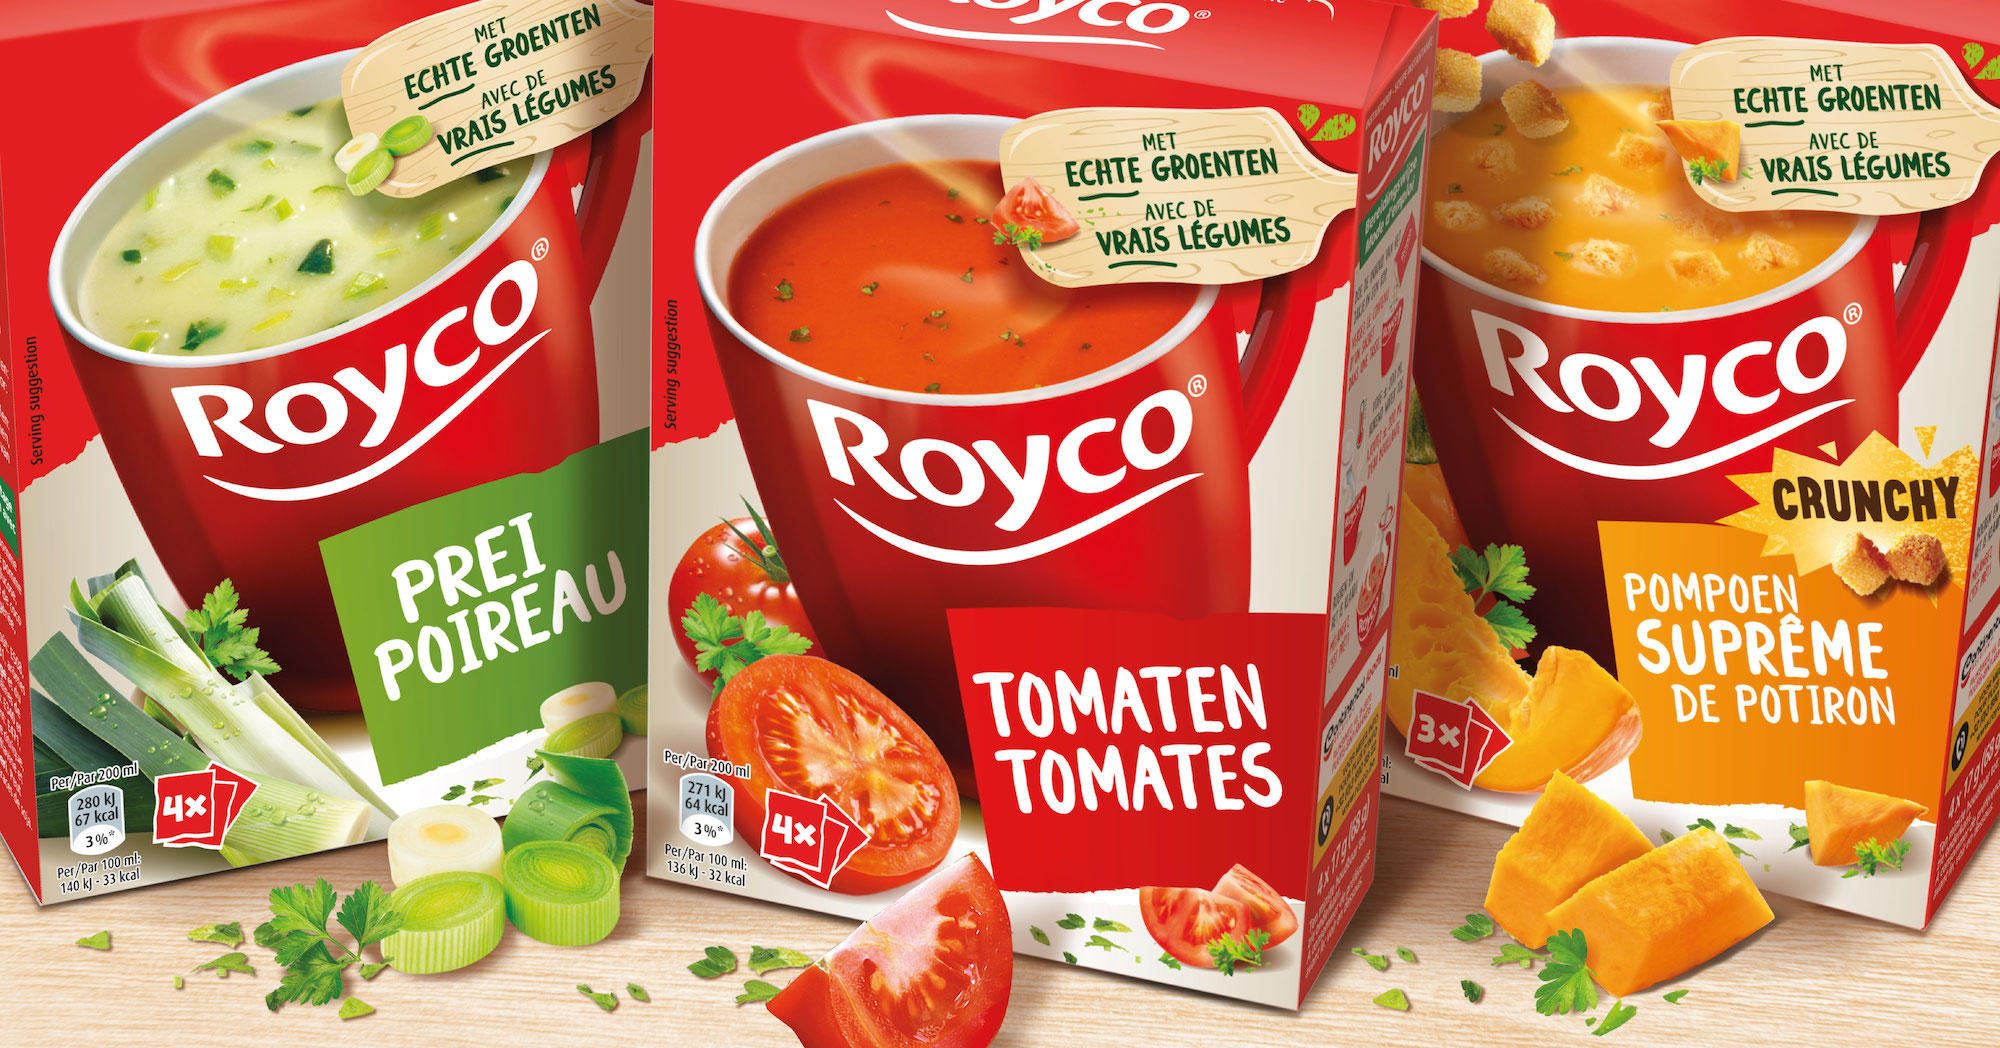 Dehydrated Vietnamese Soup Royco